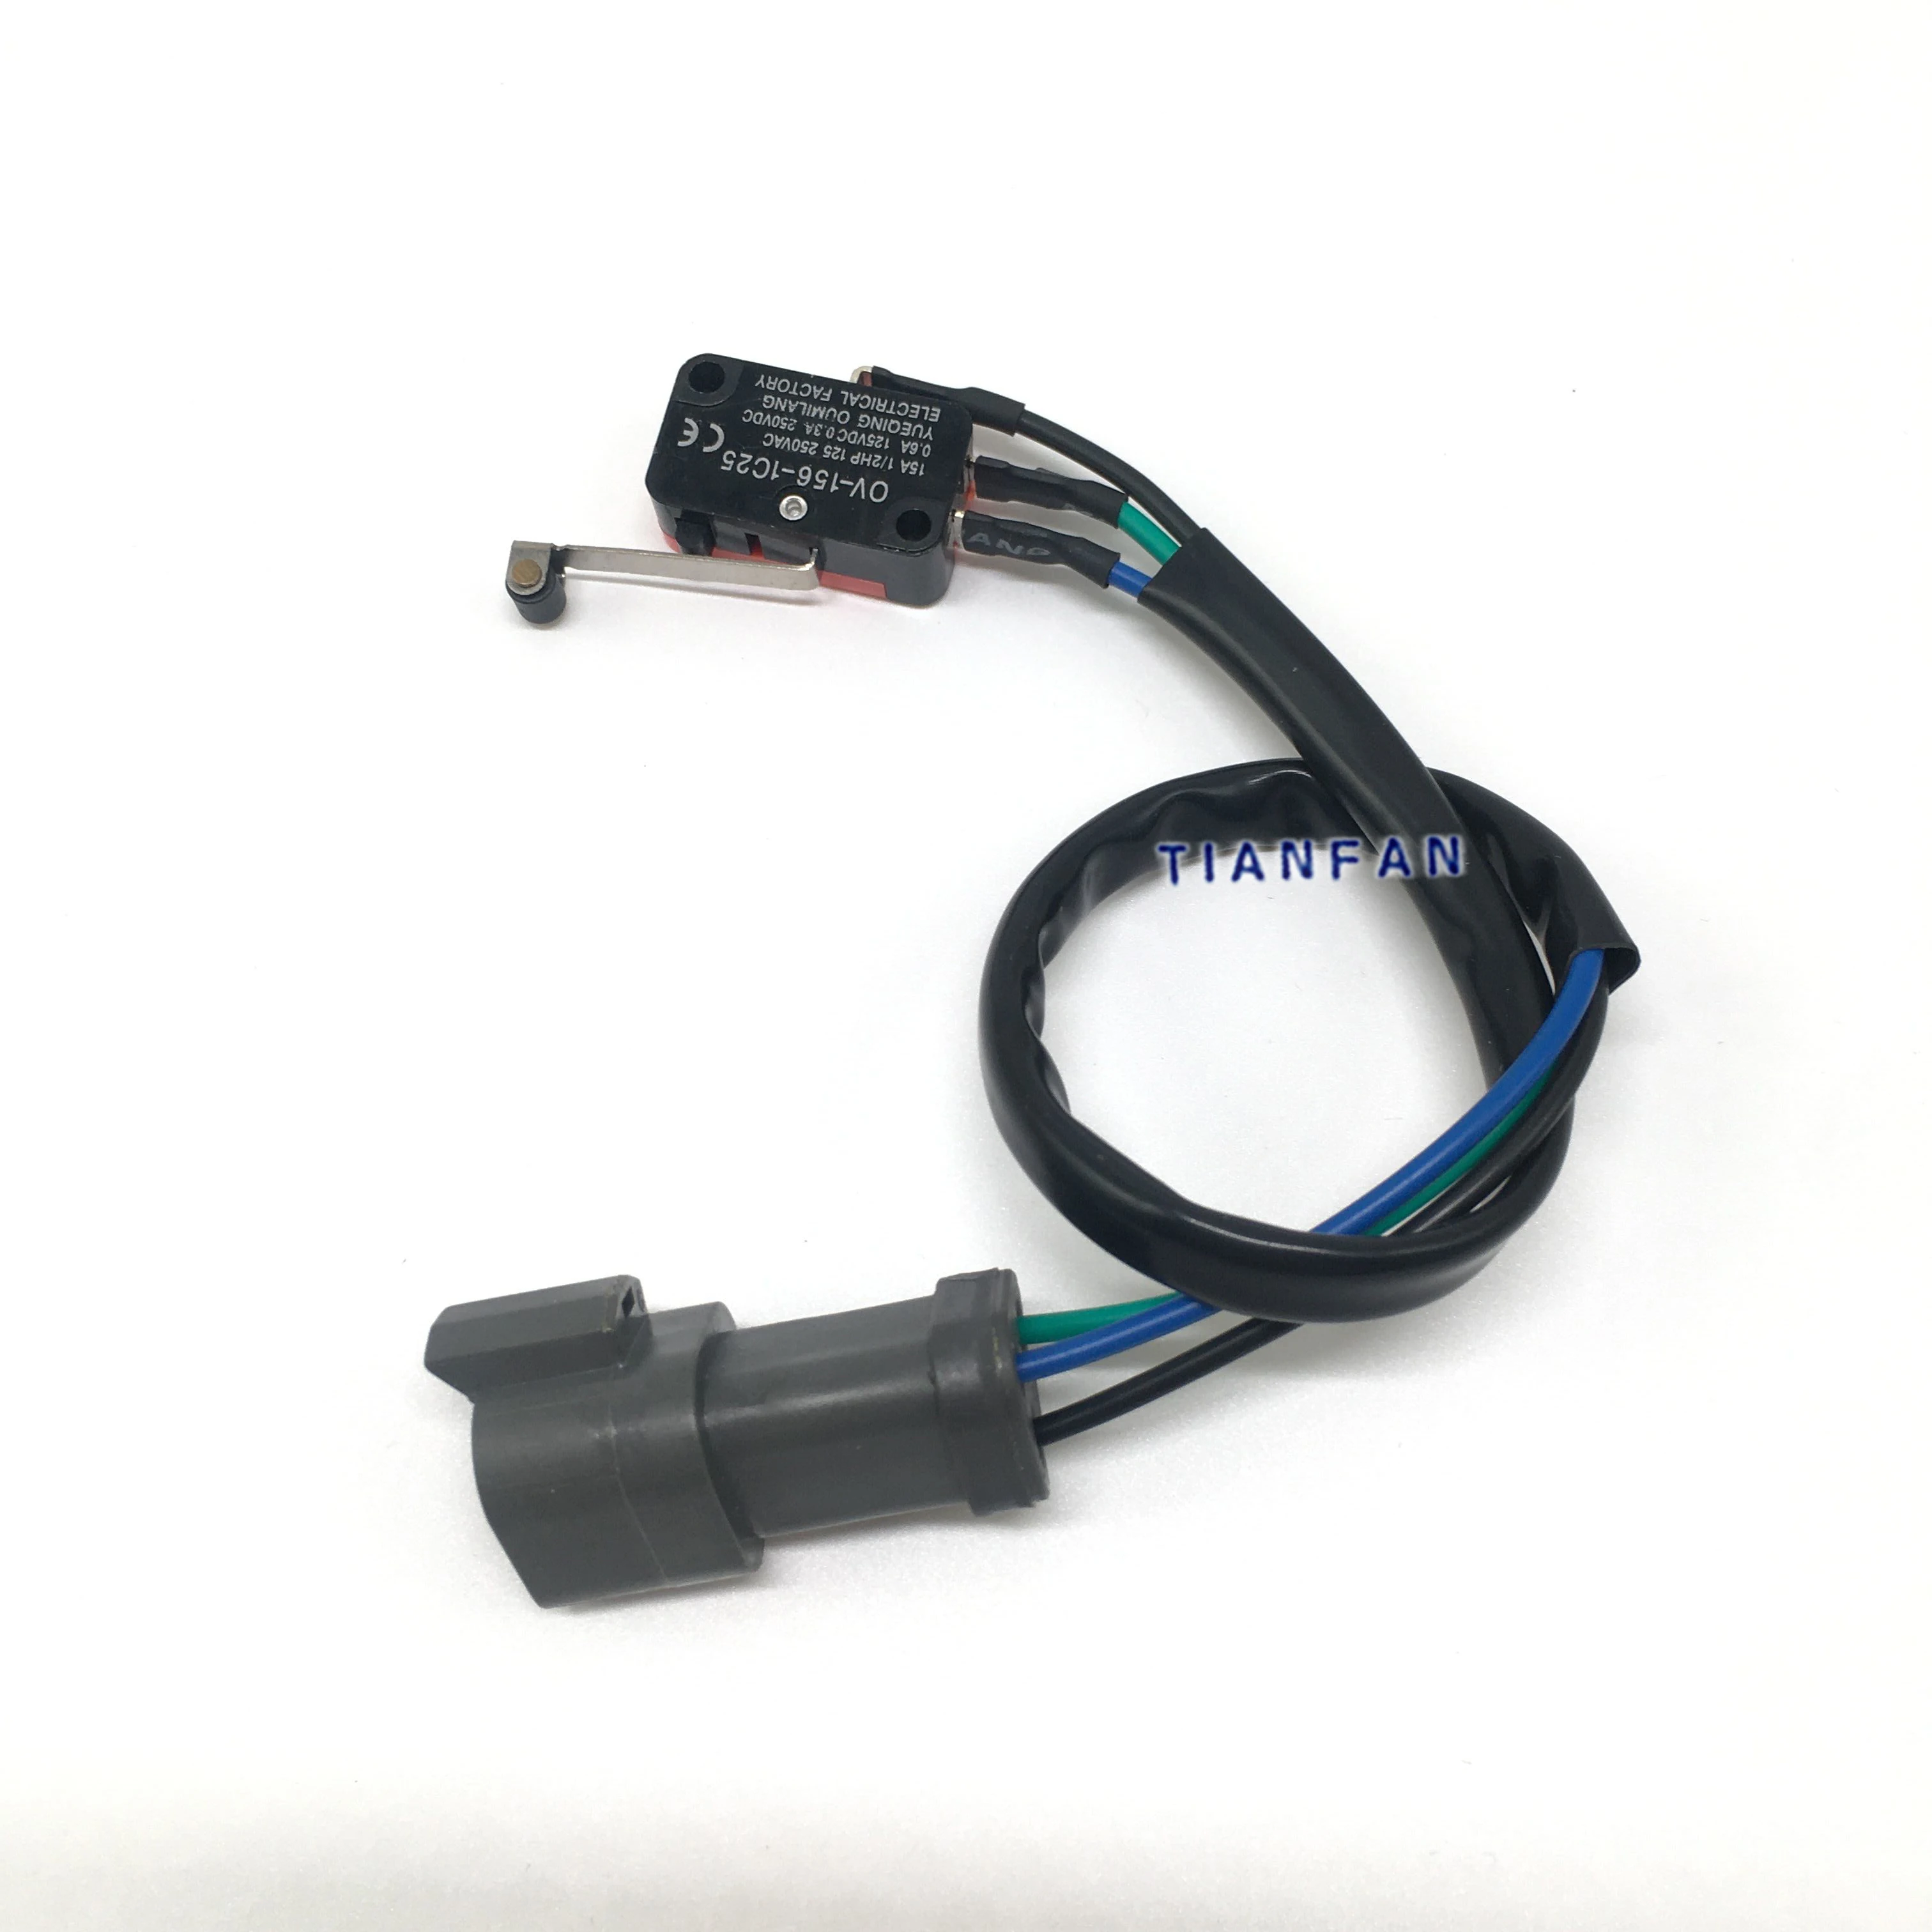 

Suitable for excavator For Caterpillar cat e312/320b/320c/320d hydraulic safety lock pilot lock microswitch